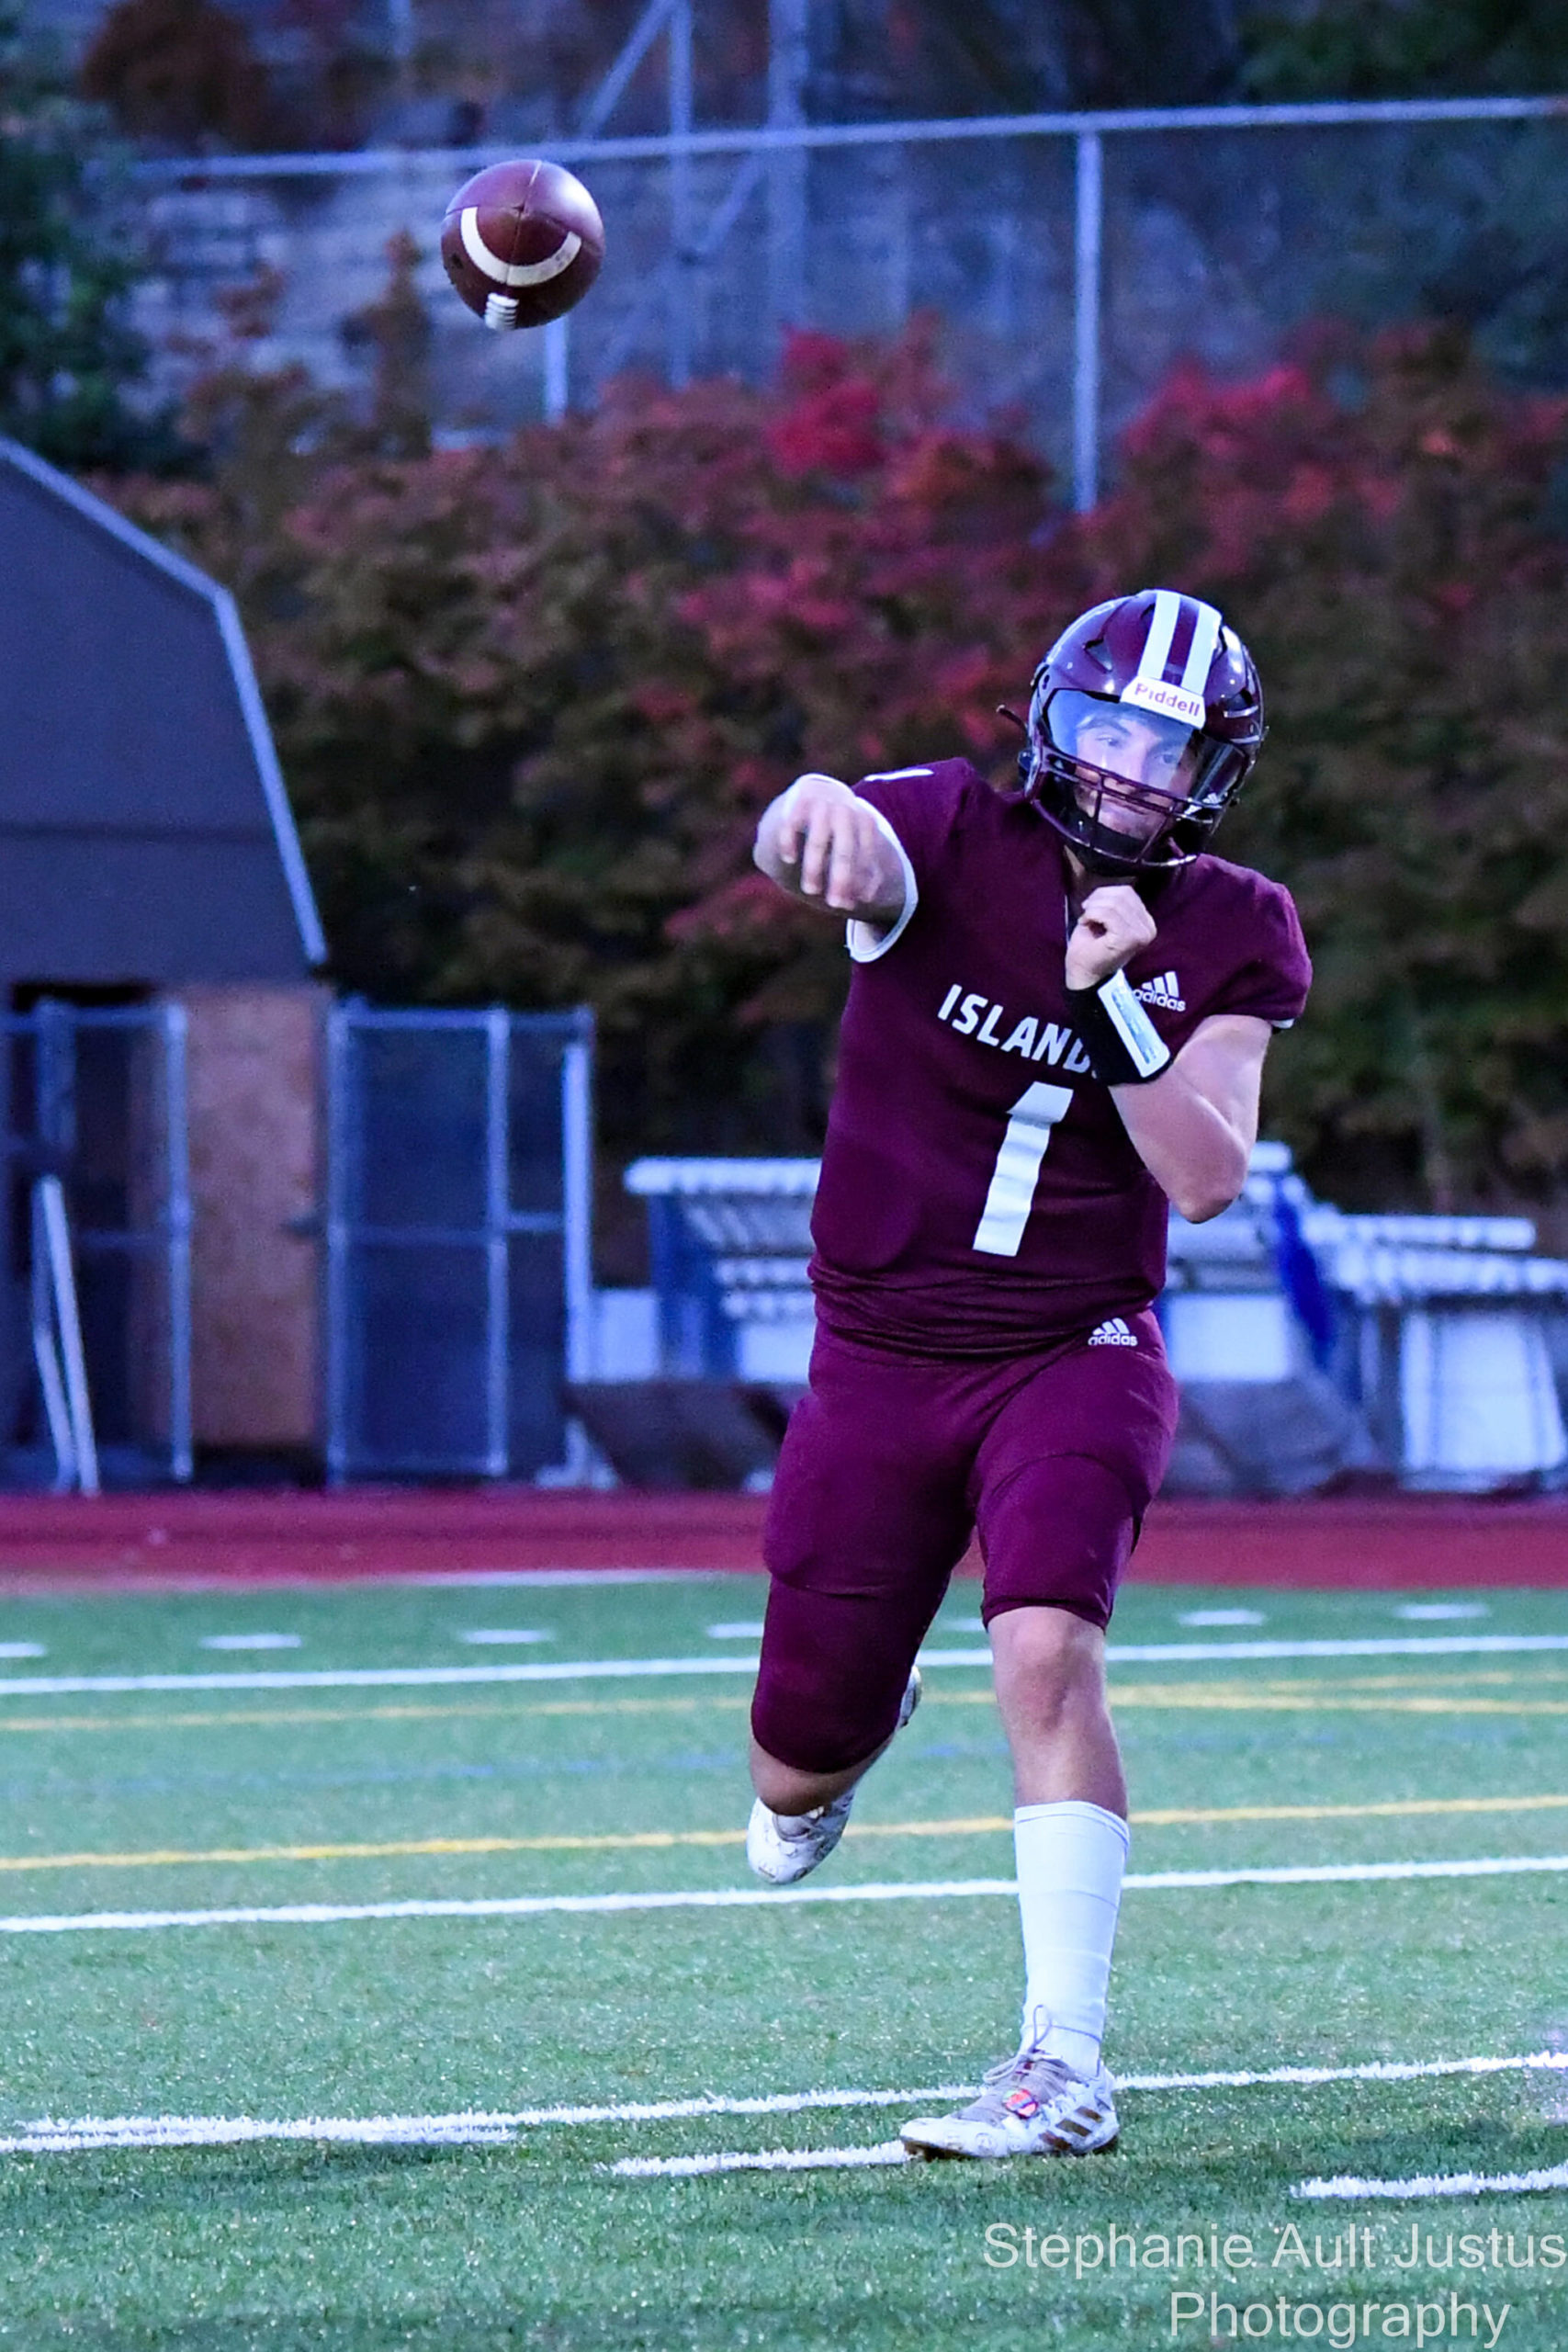 Mercer Island High School quarterback Spencer Kornblum sends a pass up field during the Islanders’ 3A KingCo home matchup against Bellevue on Sept. 22. Bellevue won, 42-0. The Islanders will next play Hazen at 7 p.m. on Sept. 30 at Renton Memorial Stadium. Photo courtesy of Stephanie Ault Justus